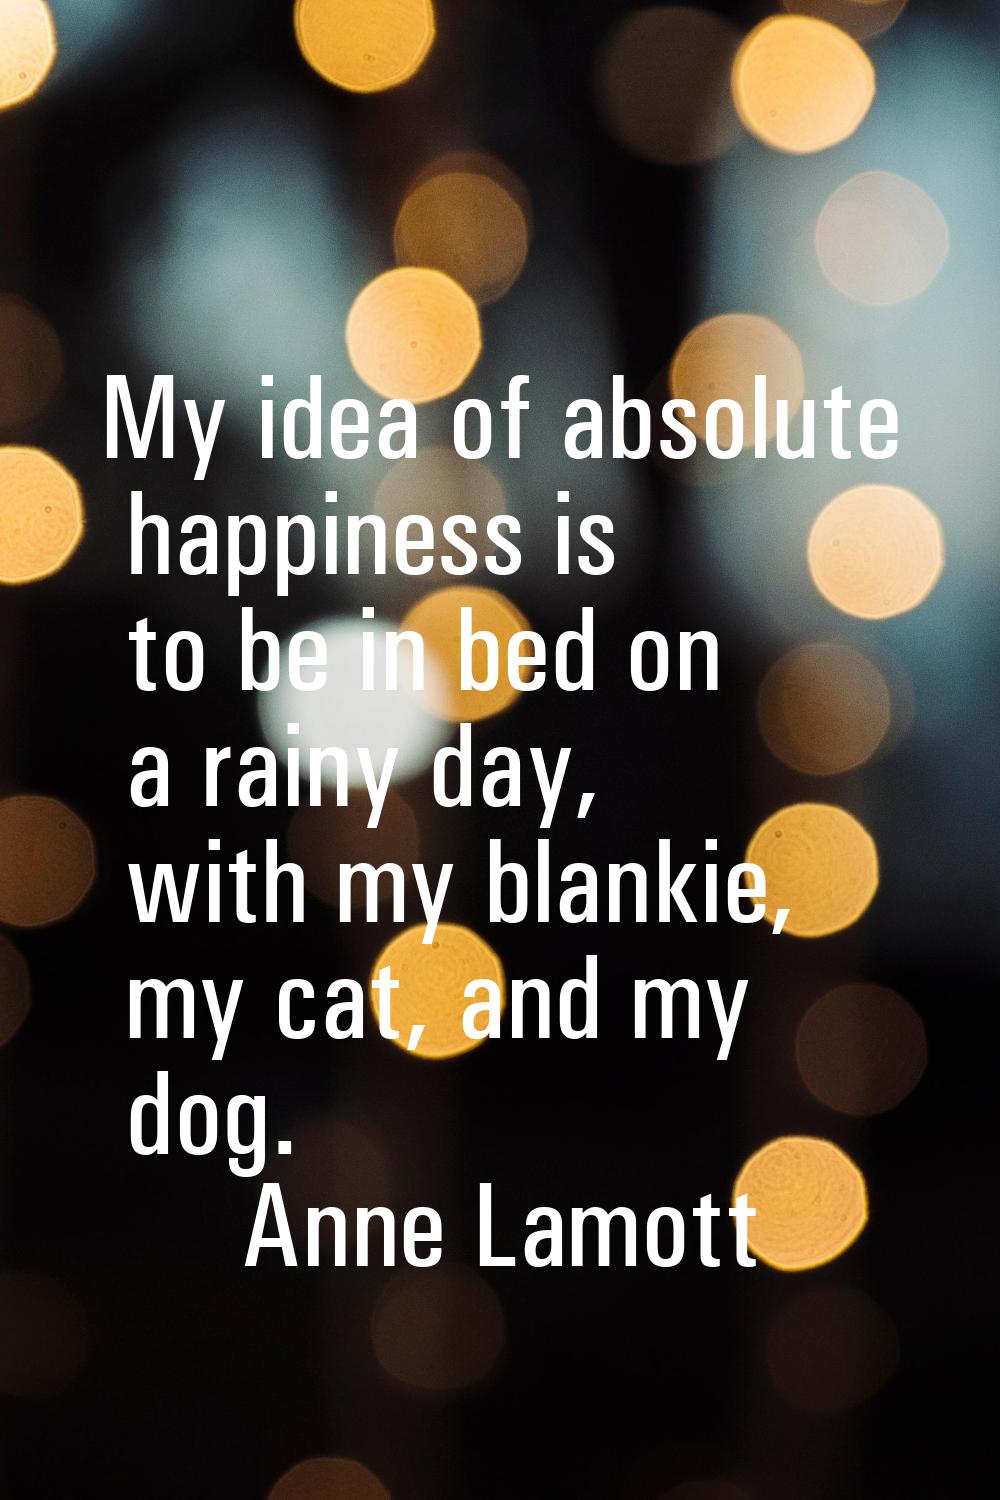 My idea of absolute happiness is to be in bed on a rainy day, with my blankie, my cat, and my dog.